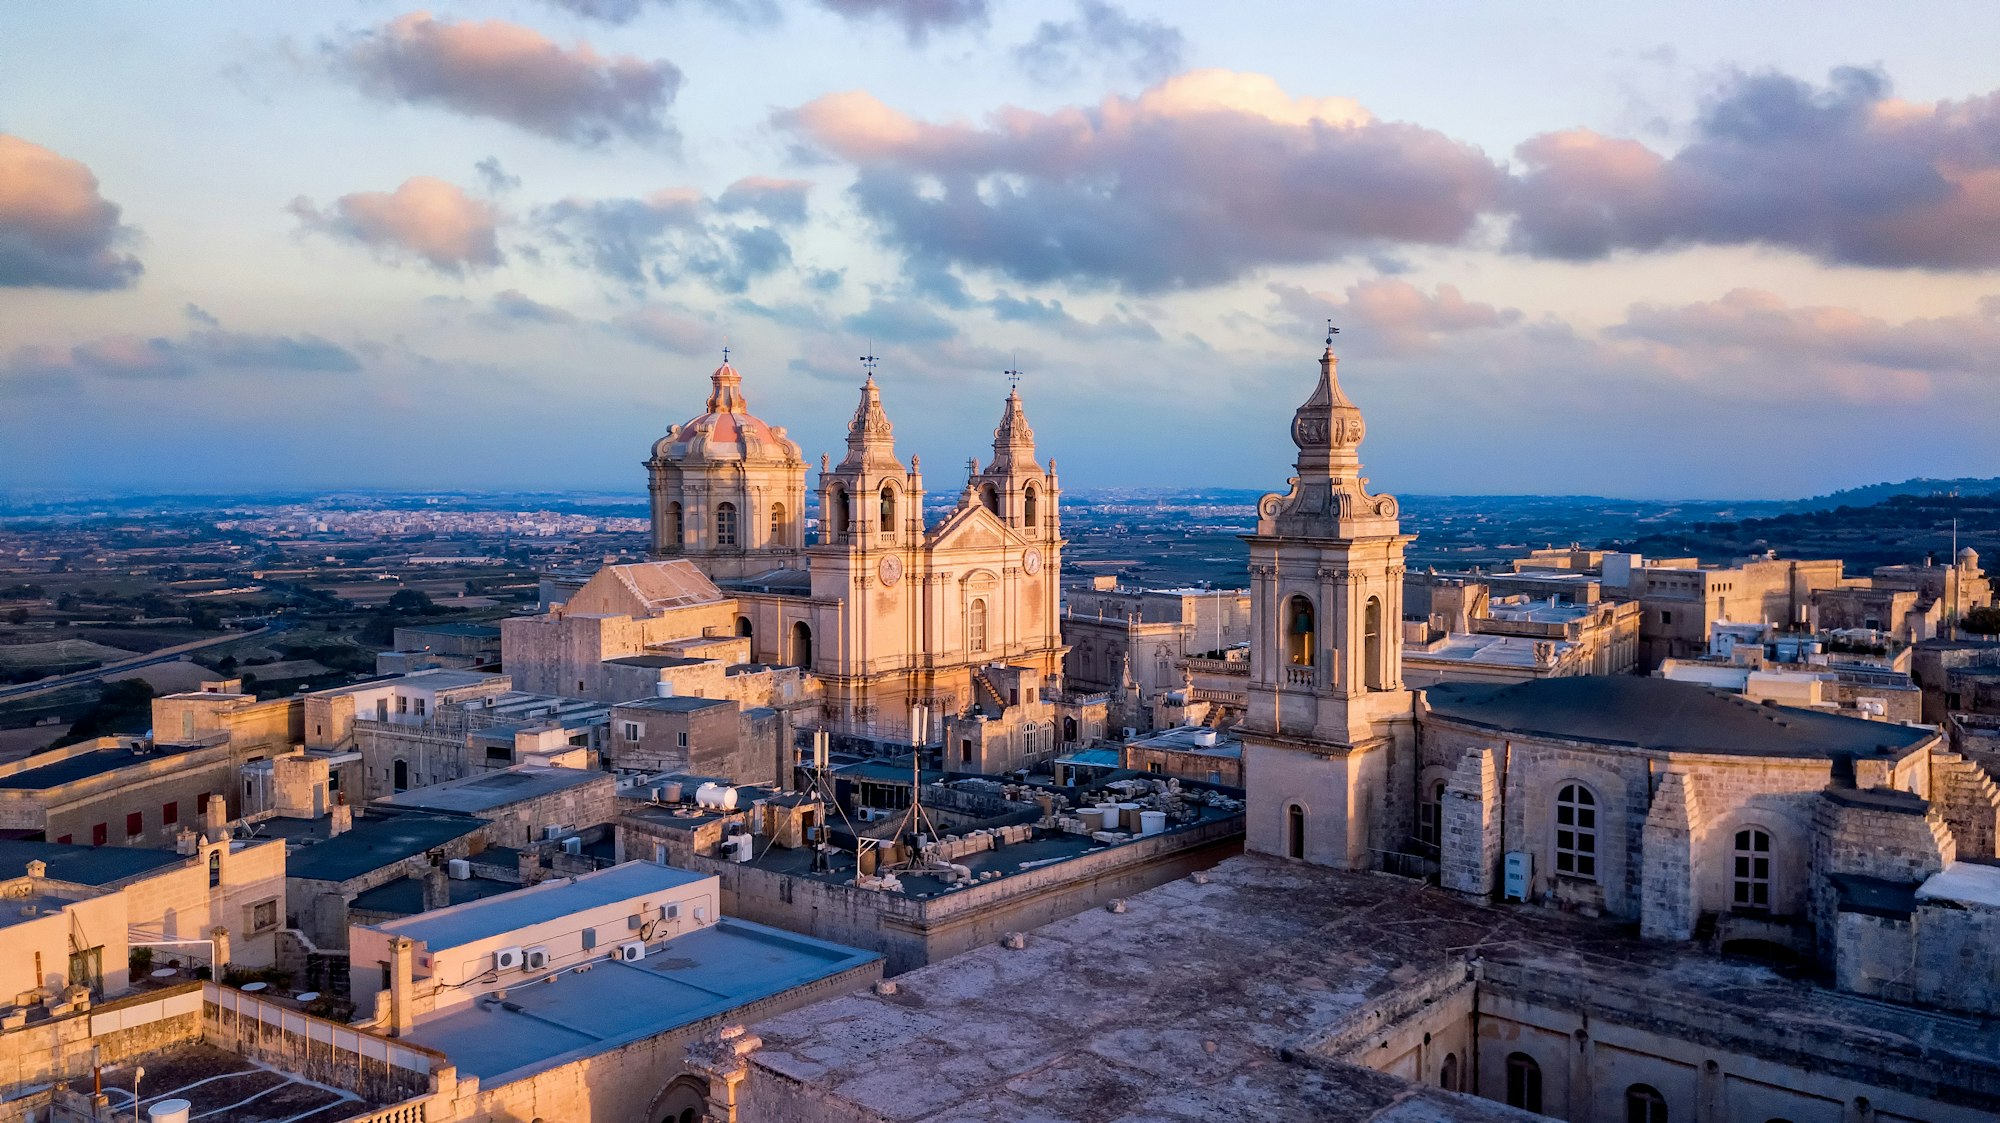 St. Paul Cathedral in medieval city Mdina, Photo by Mike Nahlii / Unsplash